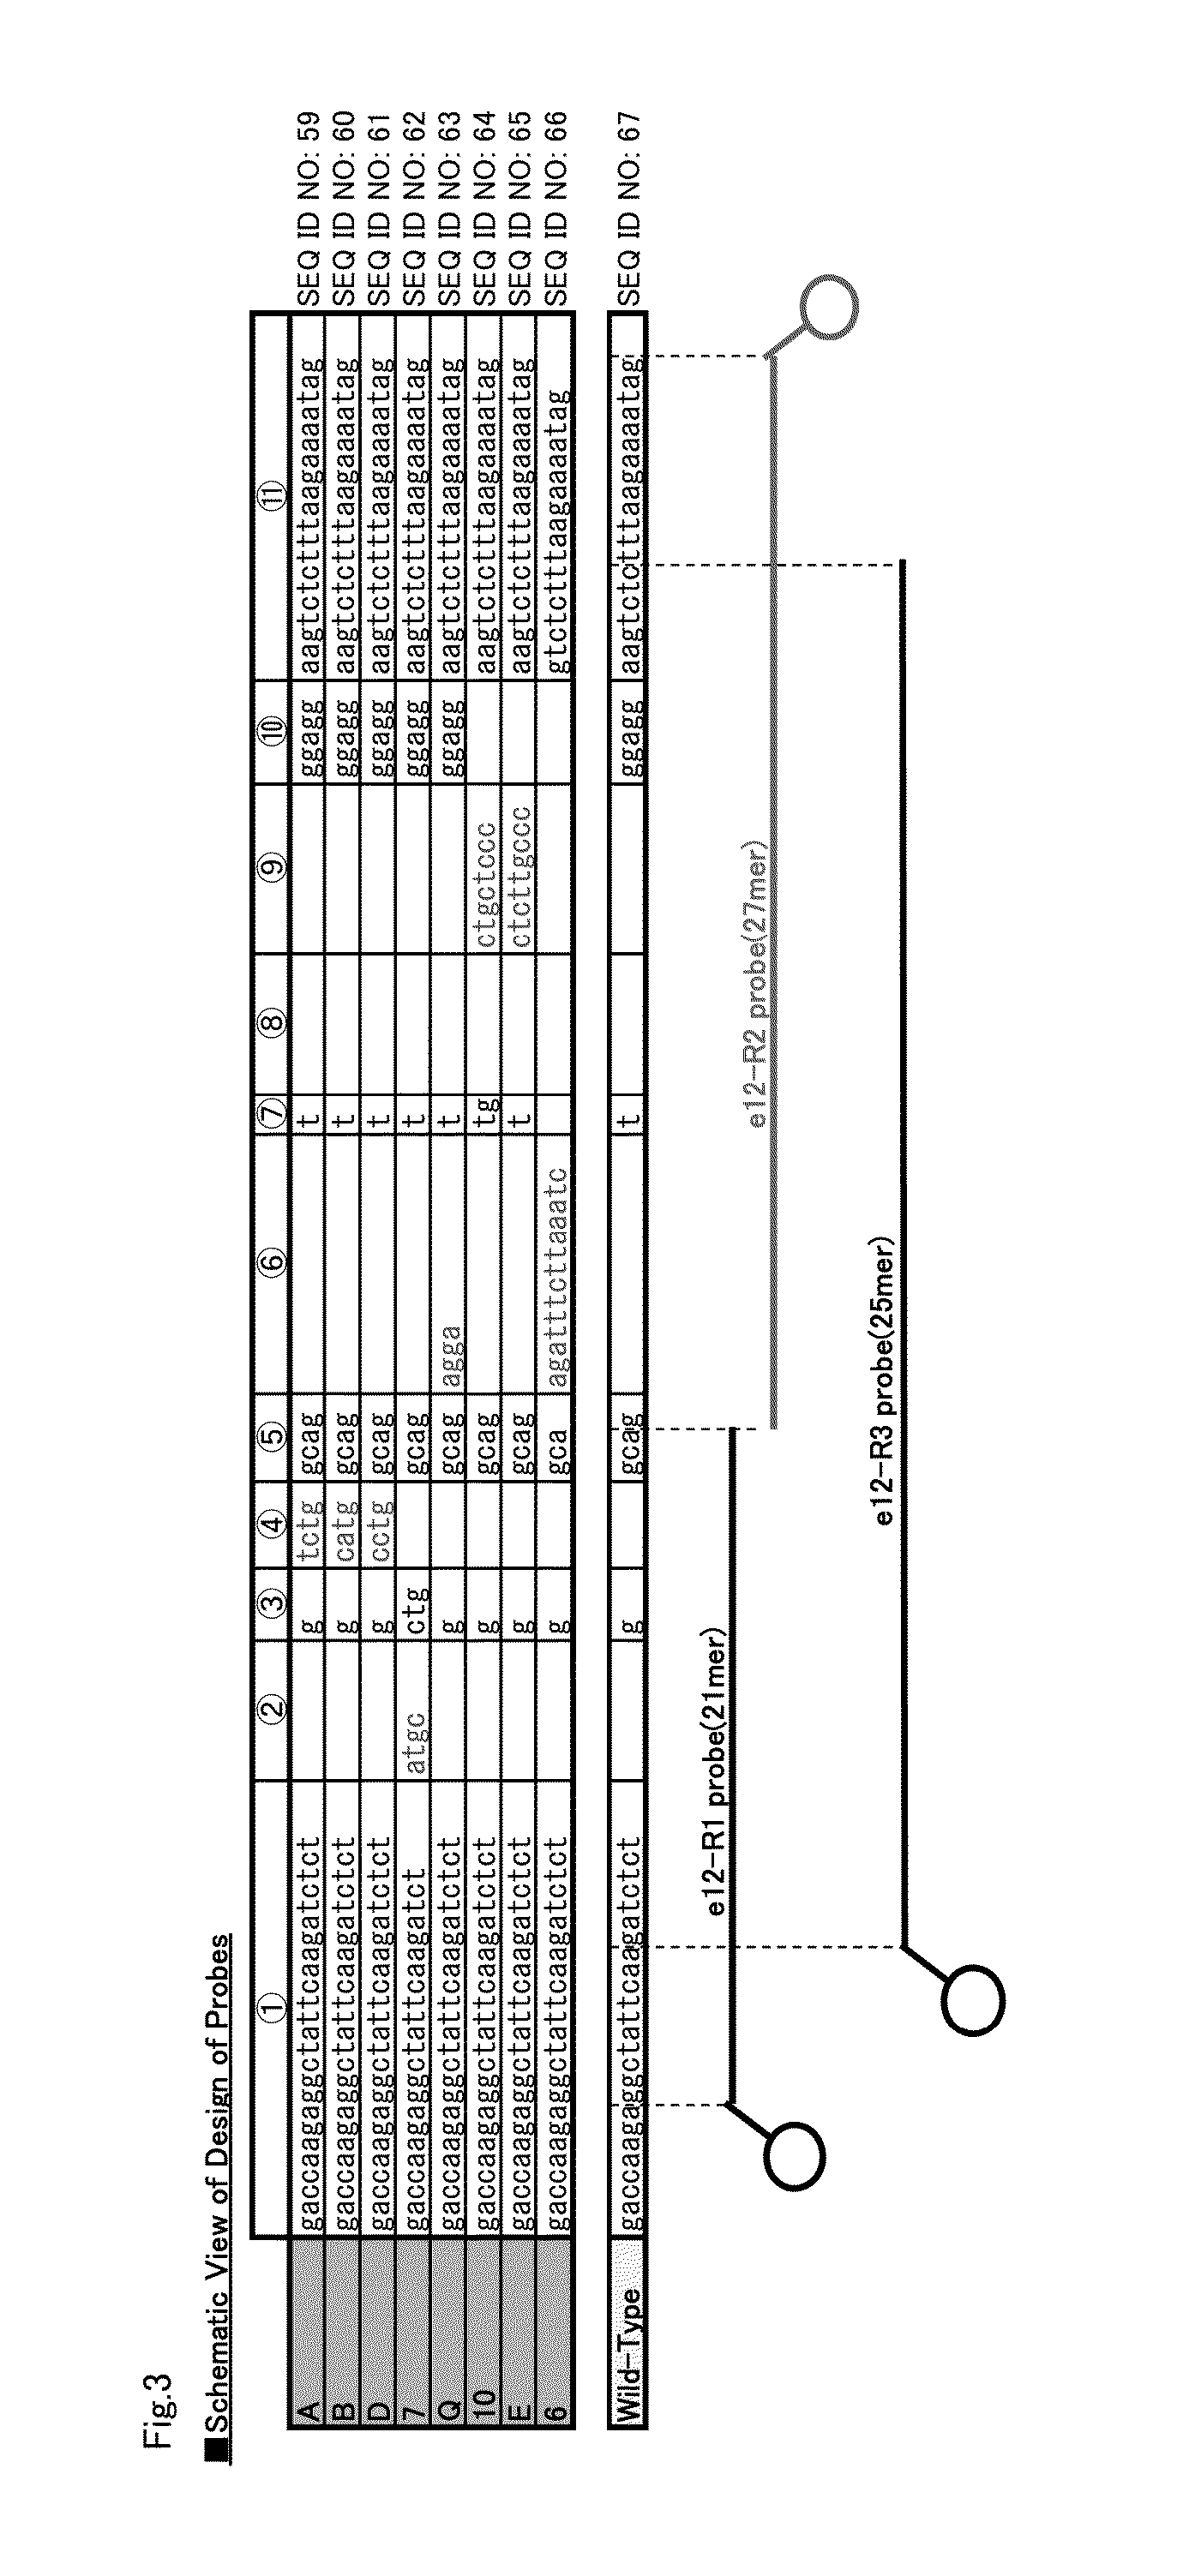 Probe for detecting polymorphism in exon 12 of NPM1 gene and use thereof